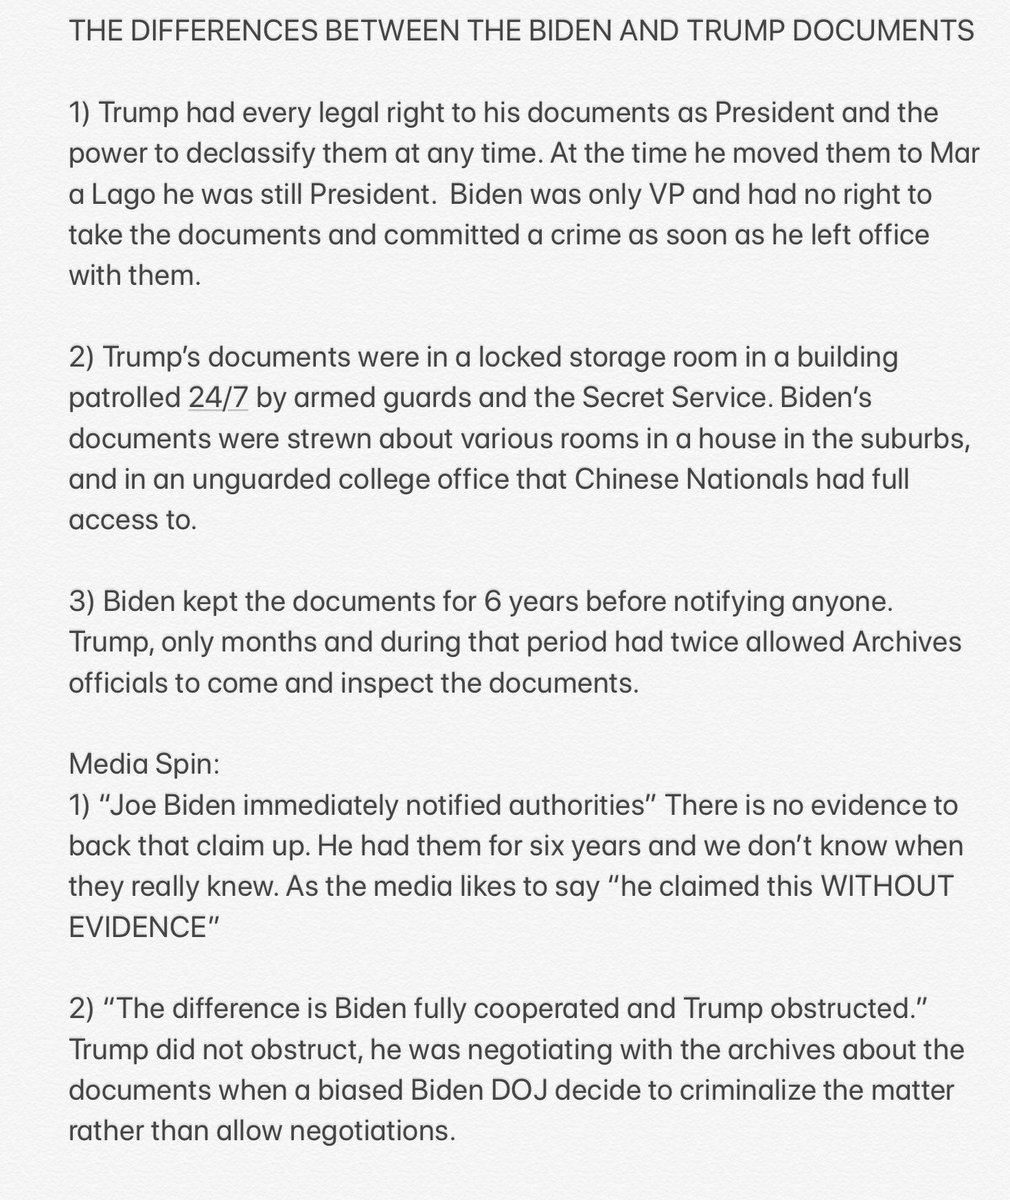 Don’t let lying Dems and the biased media fool you about the documents.